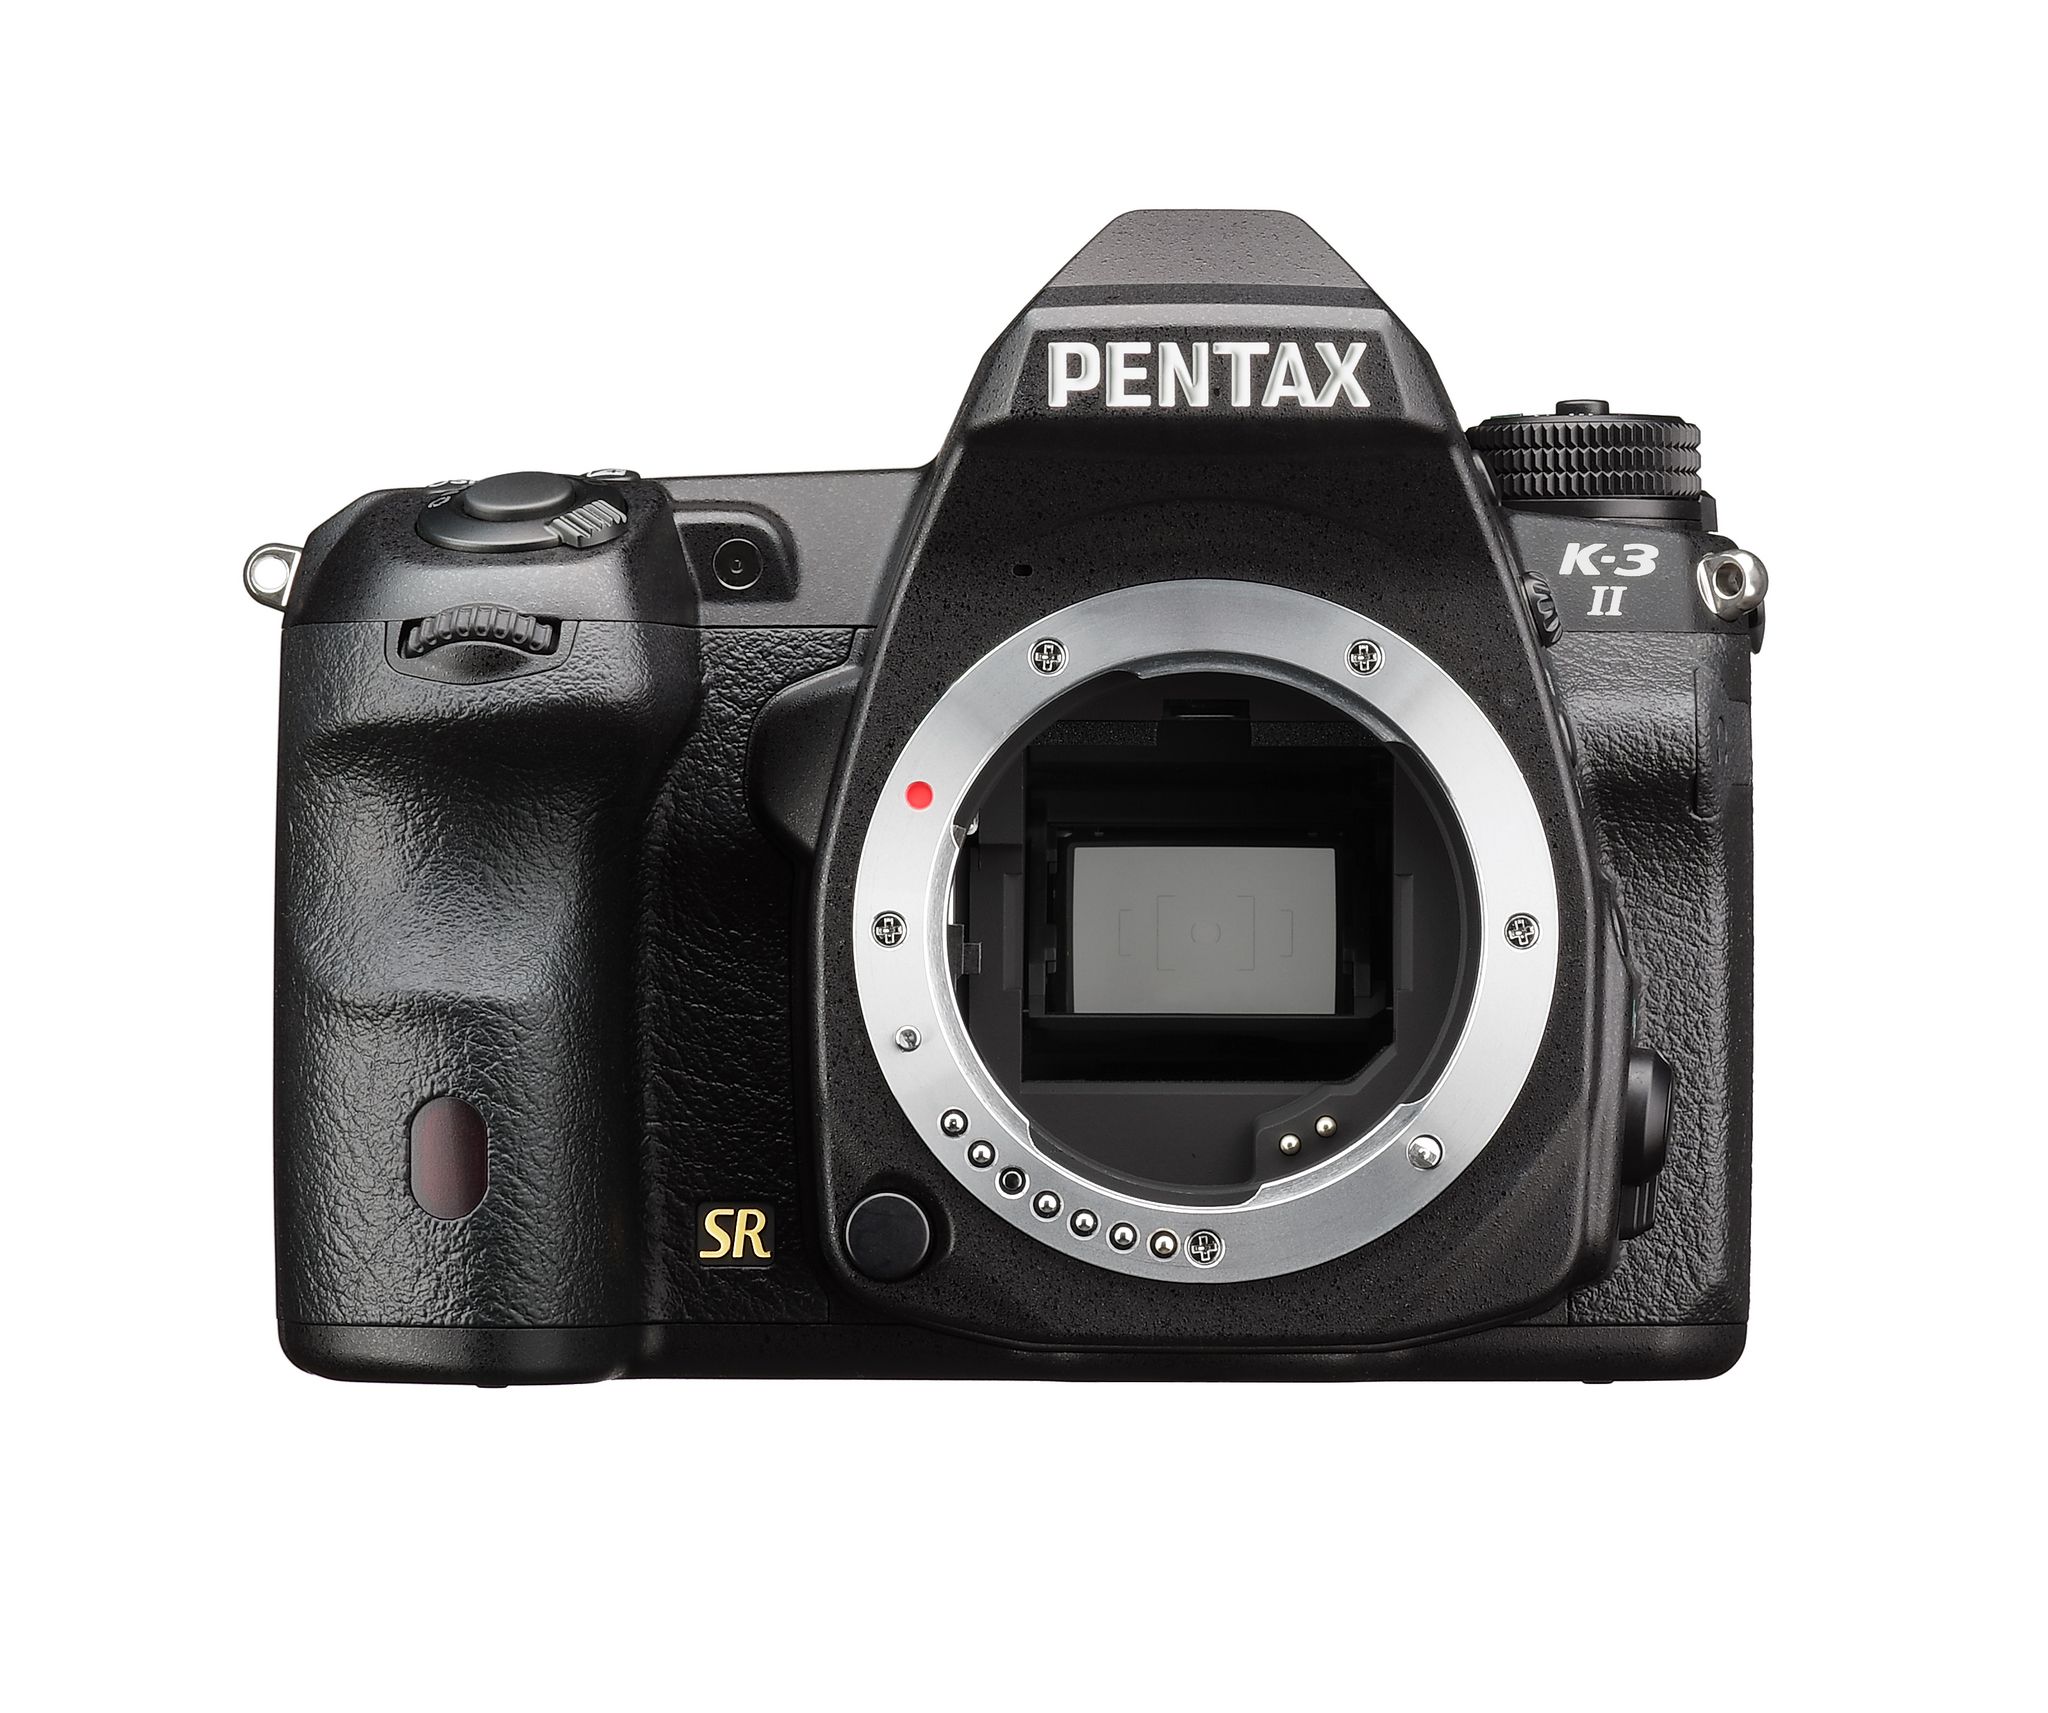 ricoh s new pentax k 3 ii is a dslr flagship with gps and 1080p video image 1